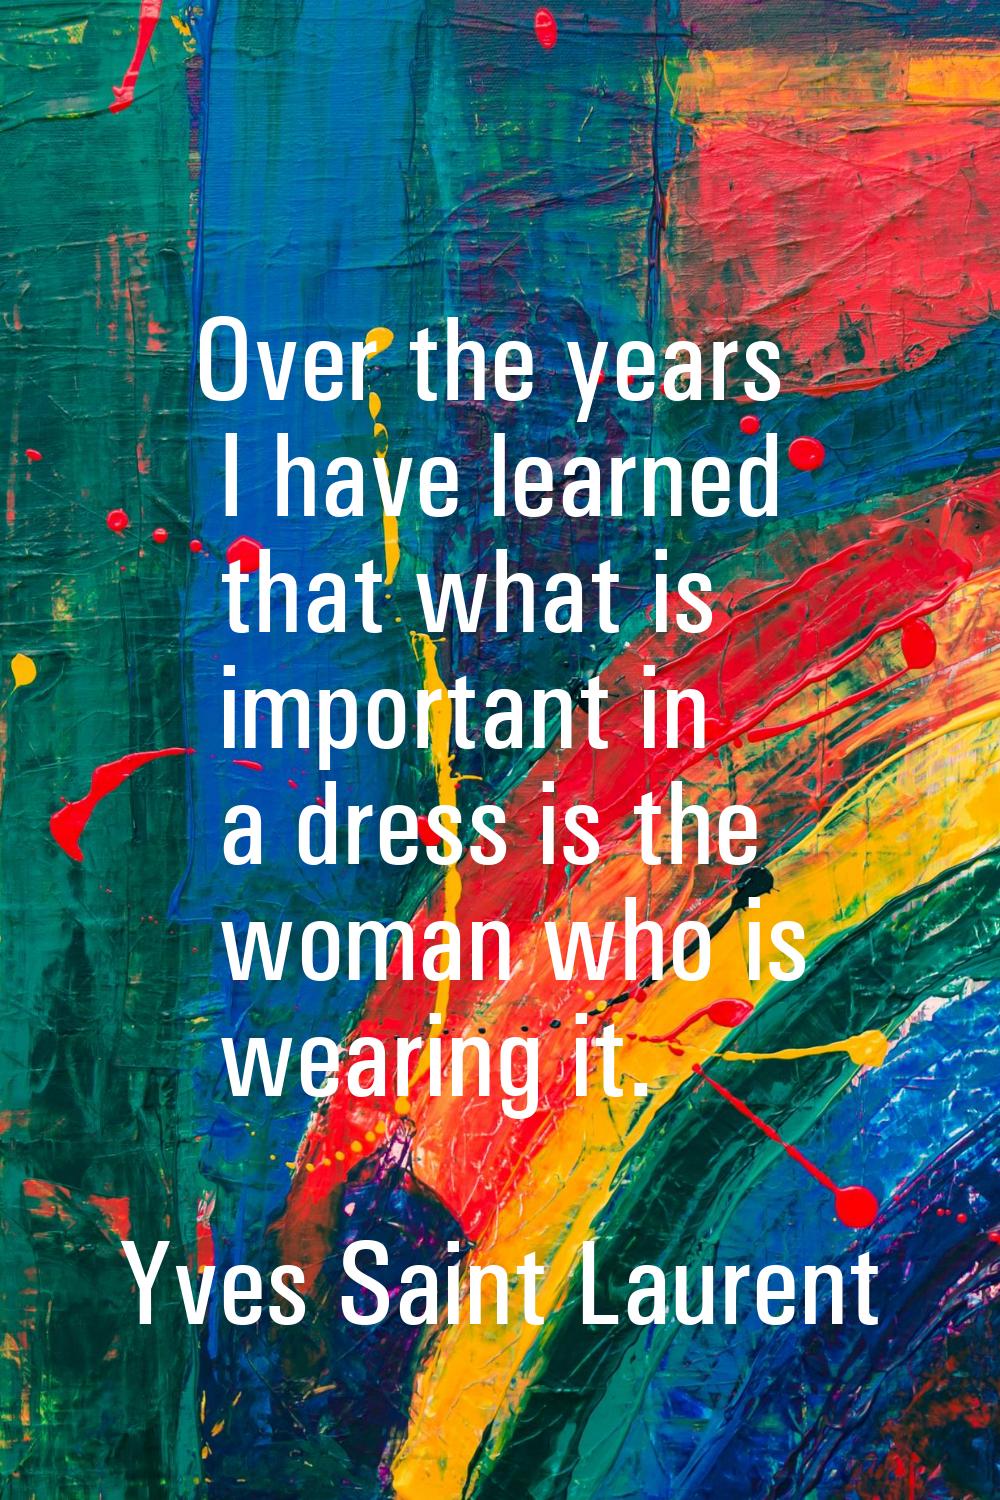 Over the years I have learned that what is important in a dress is the woman who is wearing it.